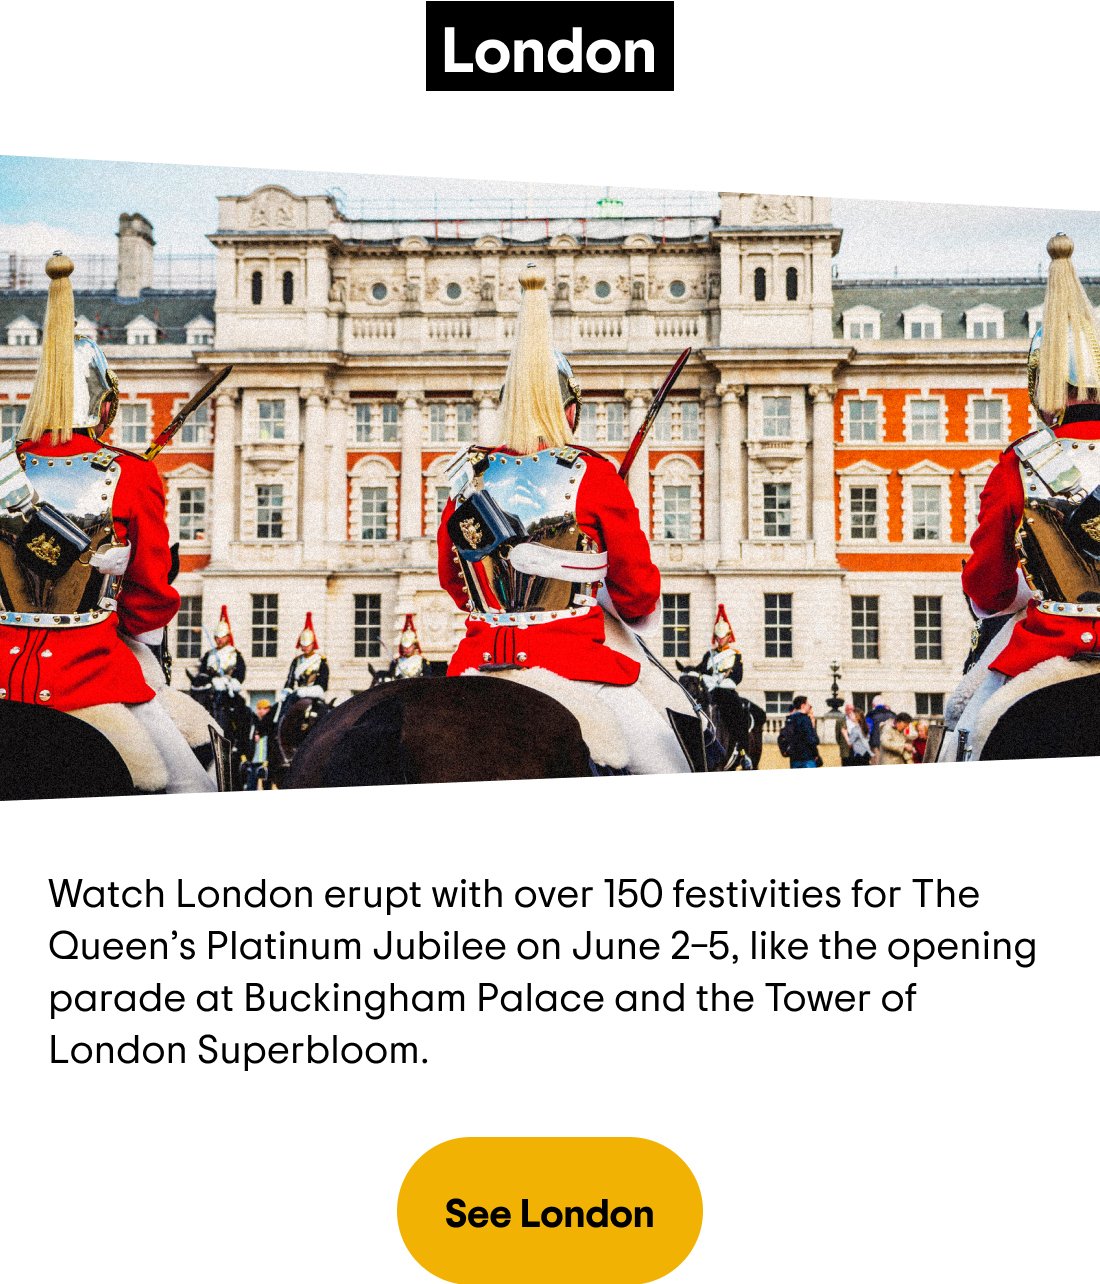 London — Watch London erupt with over 150 festivities for The Queen's Platinum Jubilee on June 2—5, like the opening parade at Buckingham Palace and the Tower of London Superbloom. See London